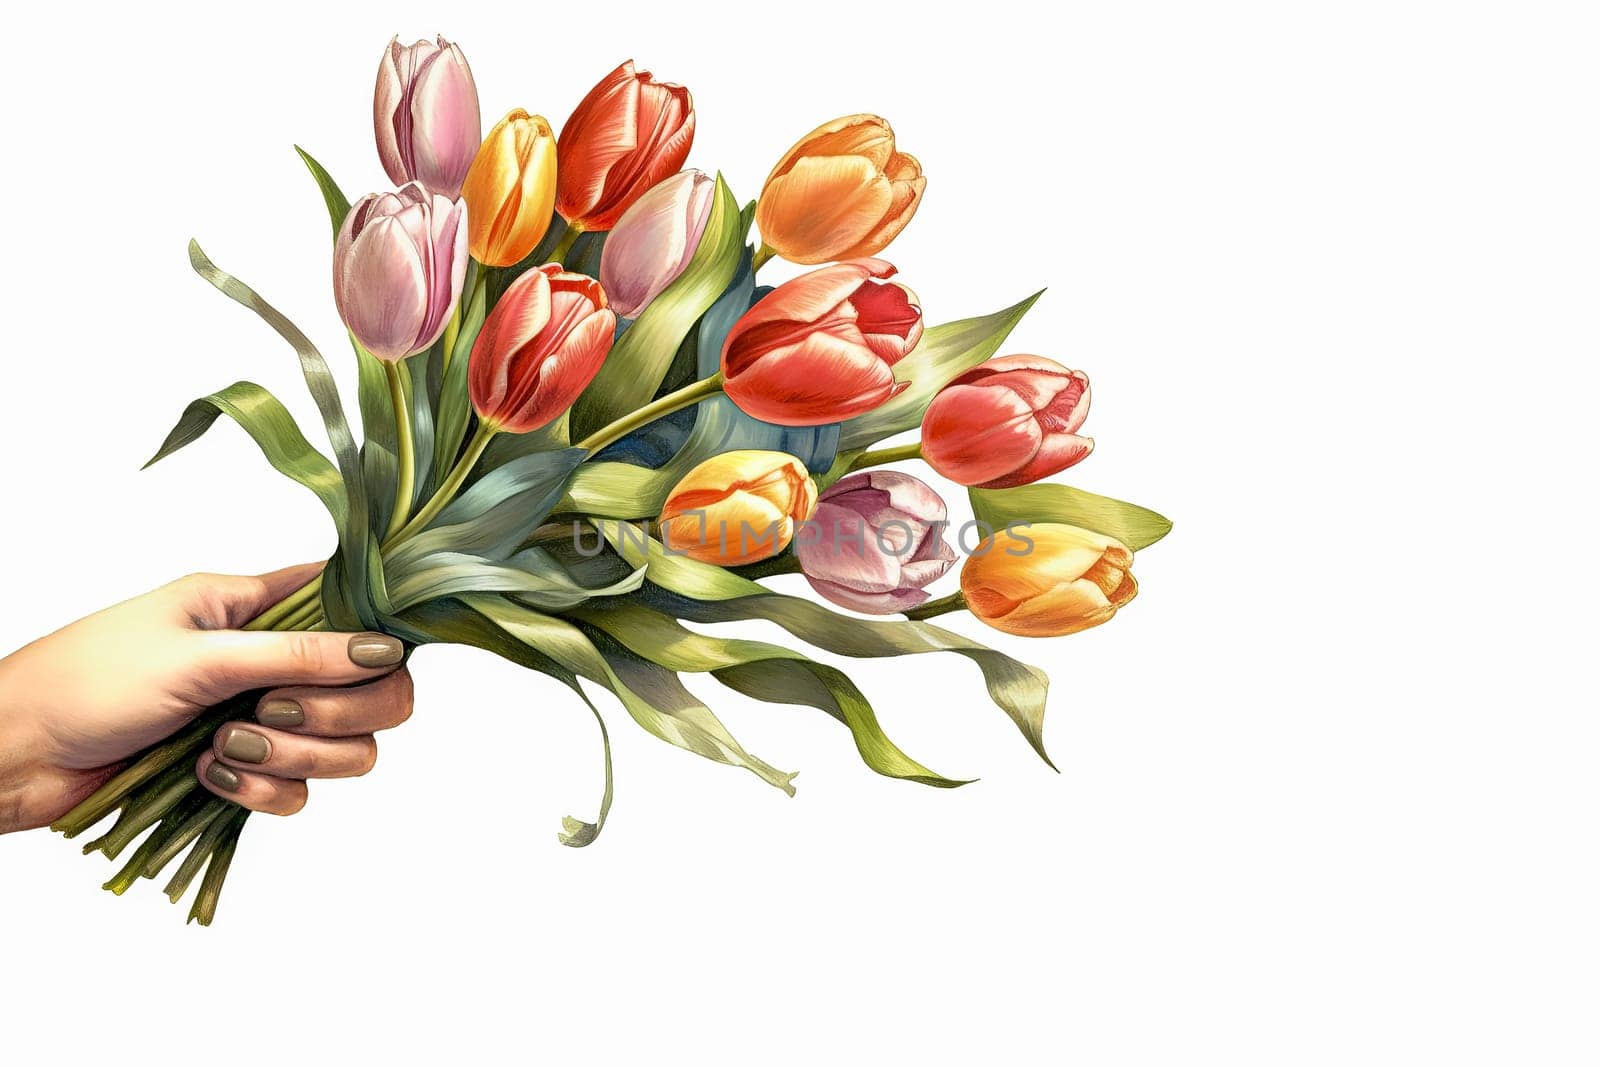 A hand holding a bouquet of tulips by Alla_Morozova93